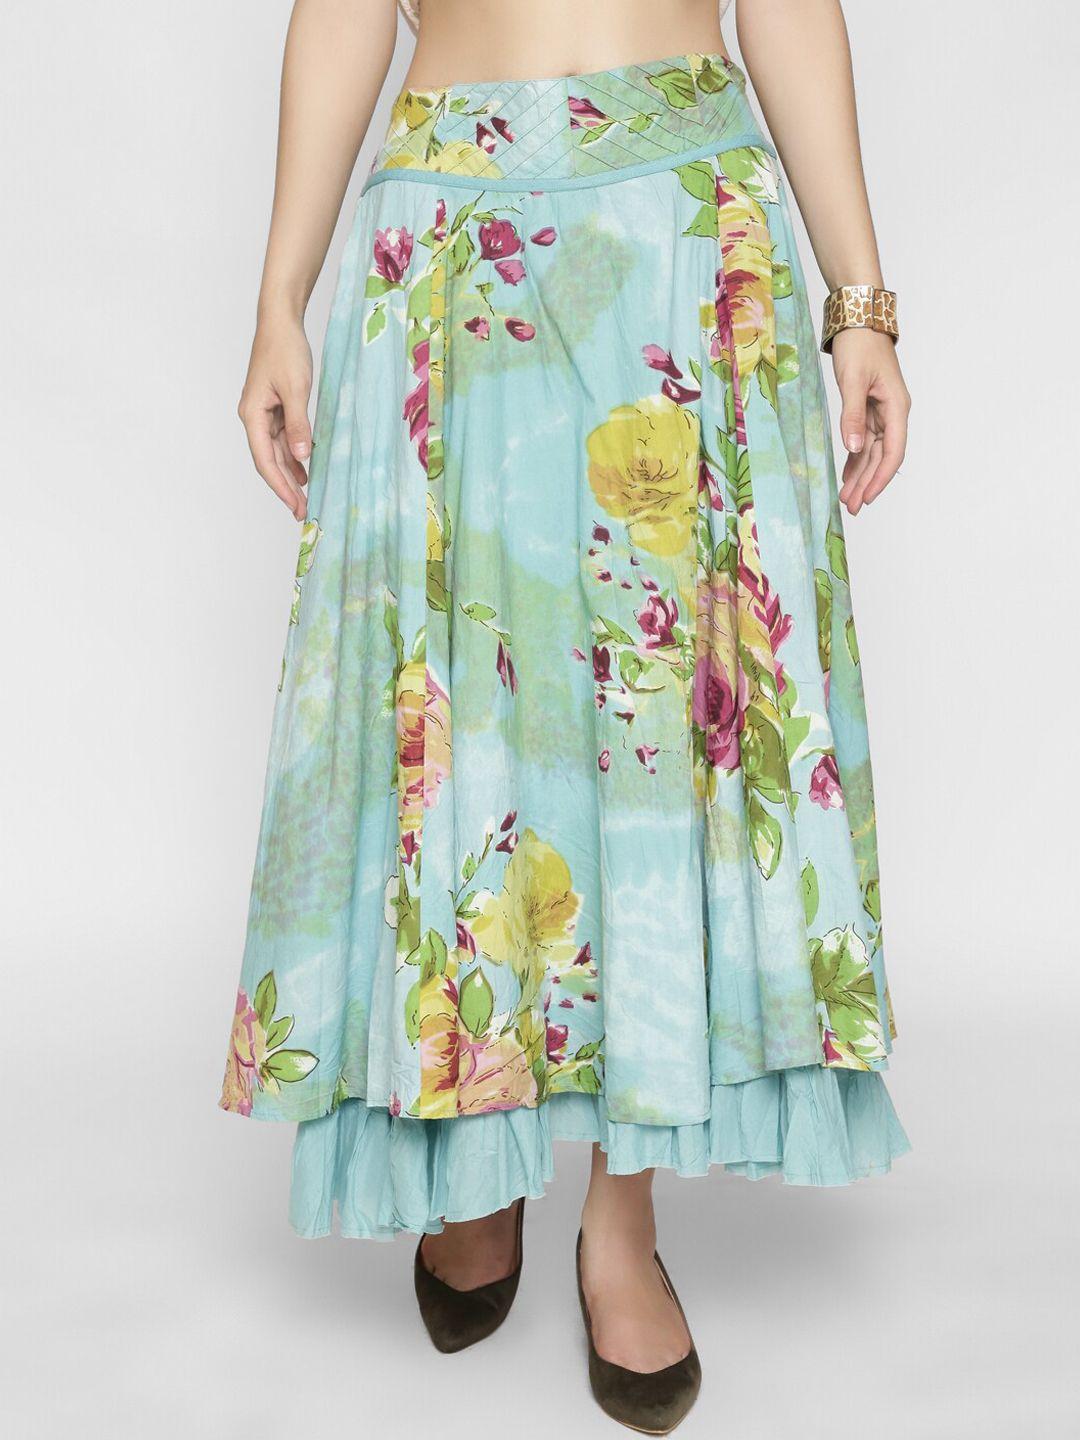 250 designs women turquoise blue floral printed midi flared skirts